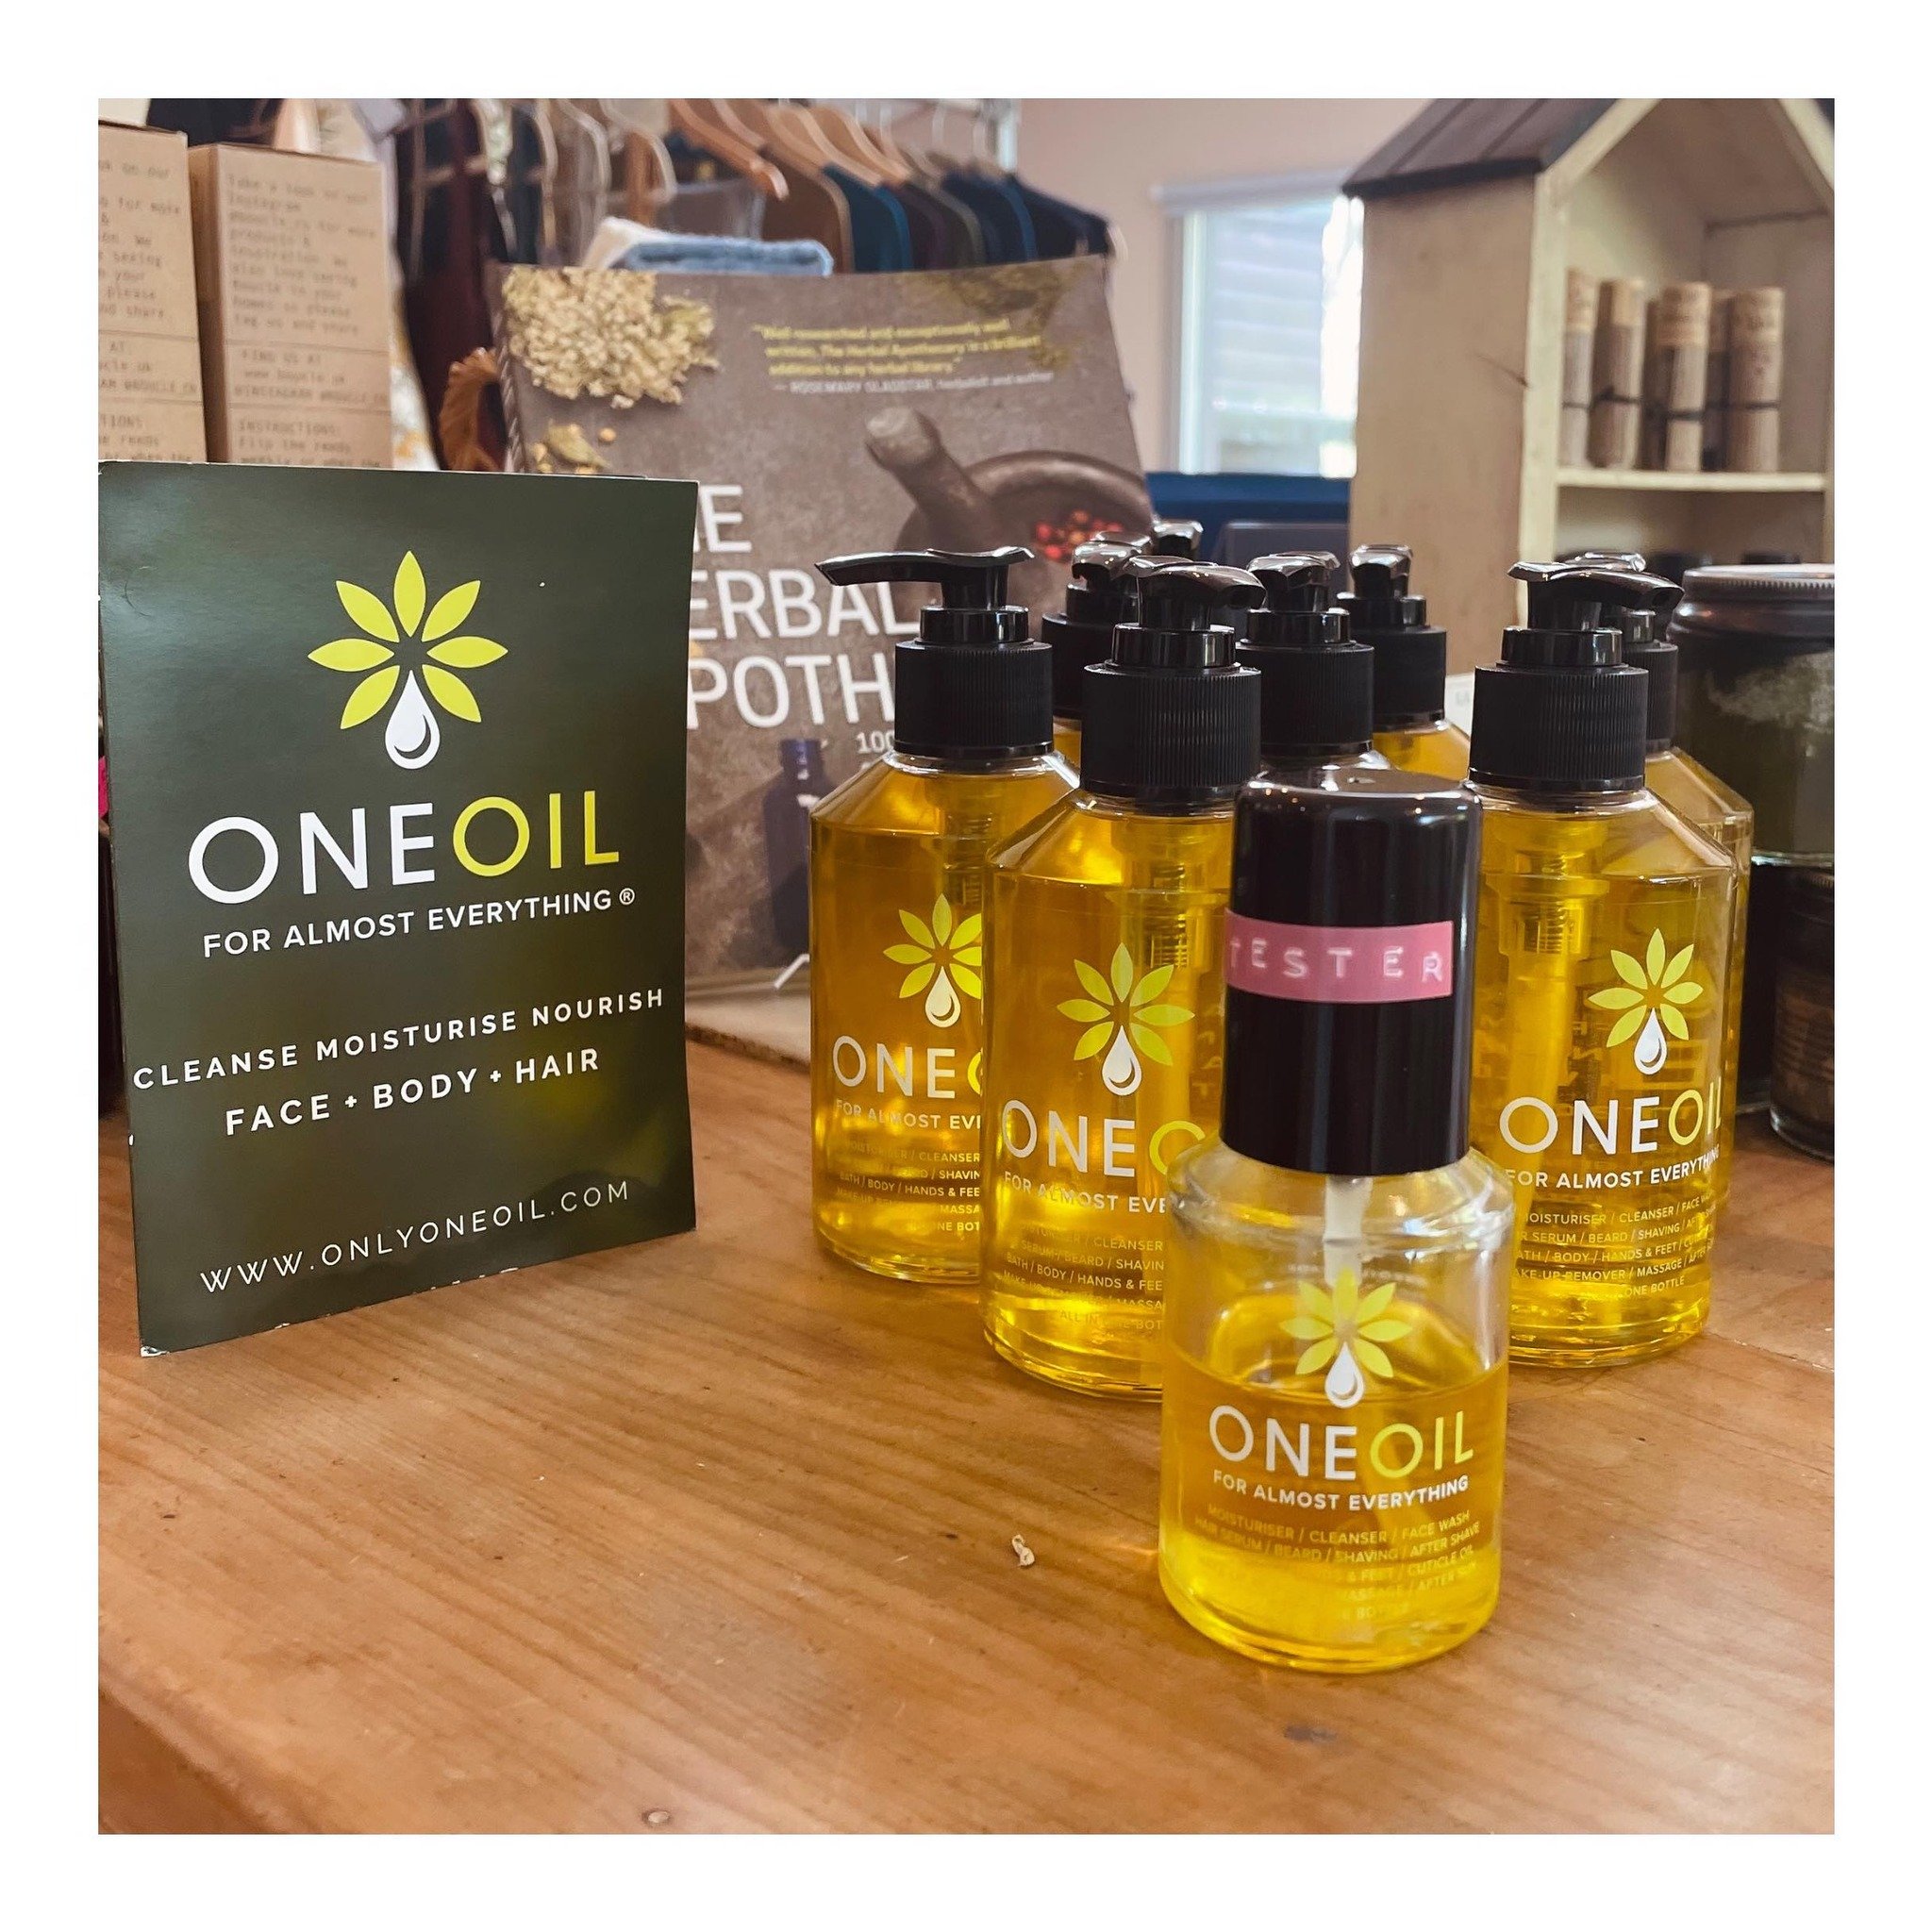 New delivery of @one__oil. We are solely stocking the larger bottles, because you will end up using it for EVERYTHING.  Made by Hannah in small batches, this oil is light, nourishing + smells delicious #oneoil #naturalskincare #madeinsomerset #faceoi